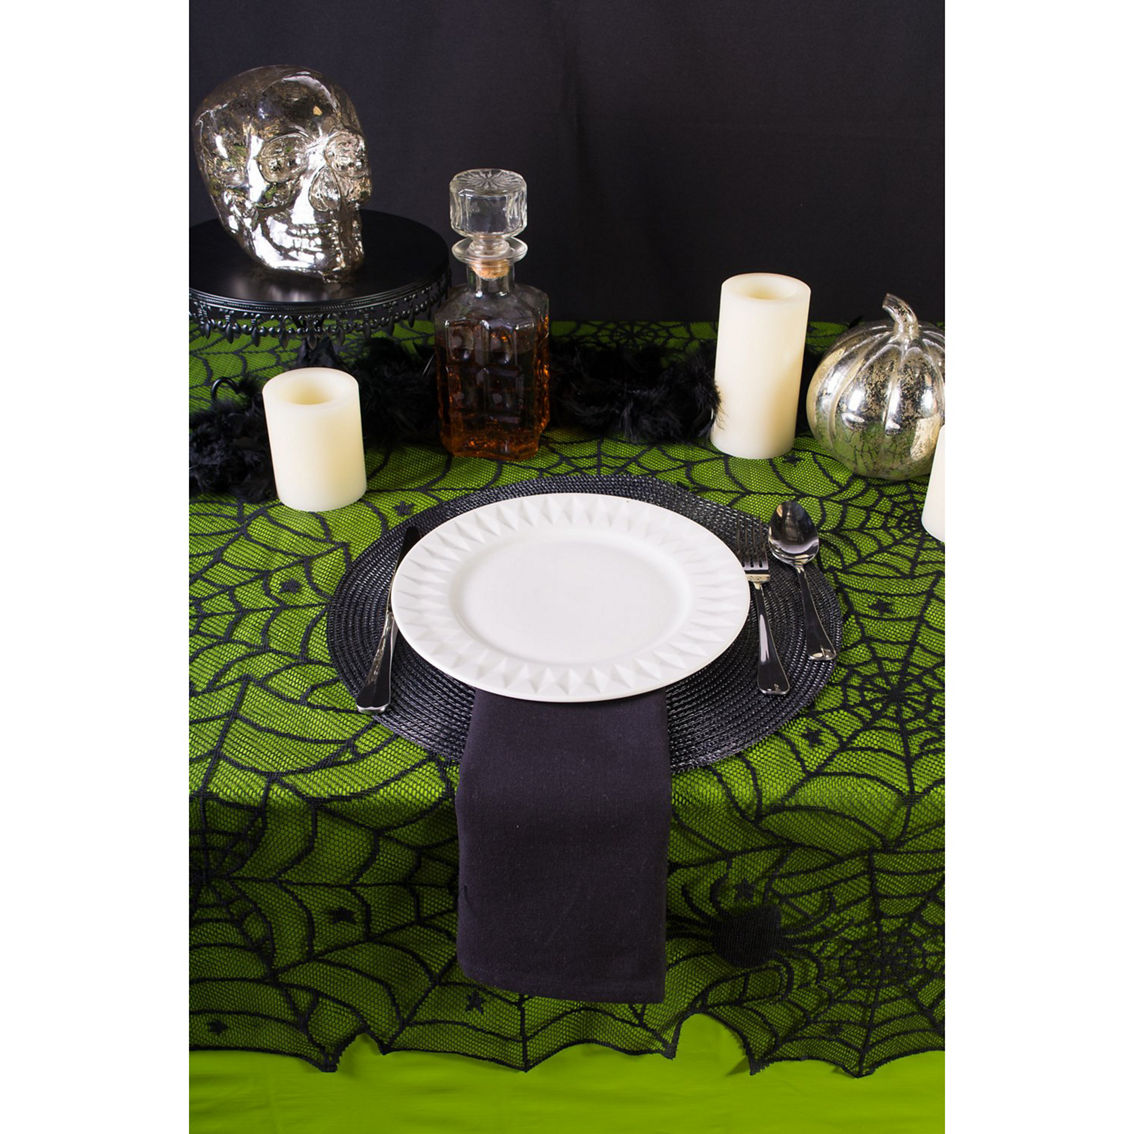 Design Imports 54 in. x 72 in. Halloween Lace Tablecloth - Image 7 of 9